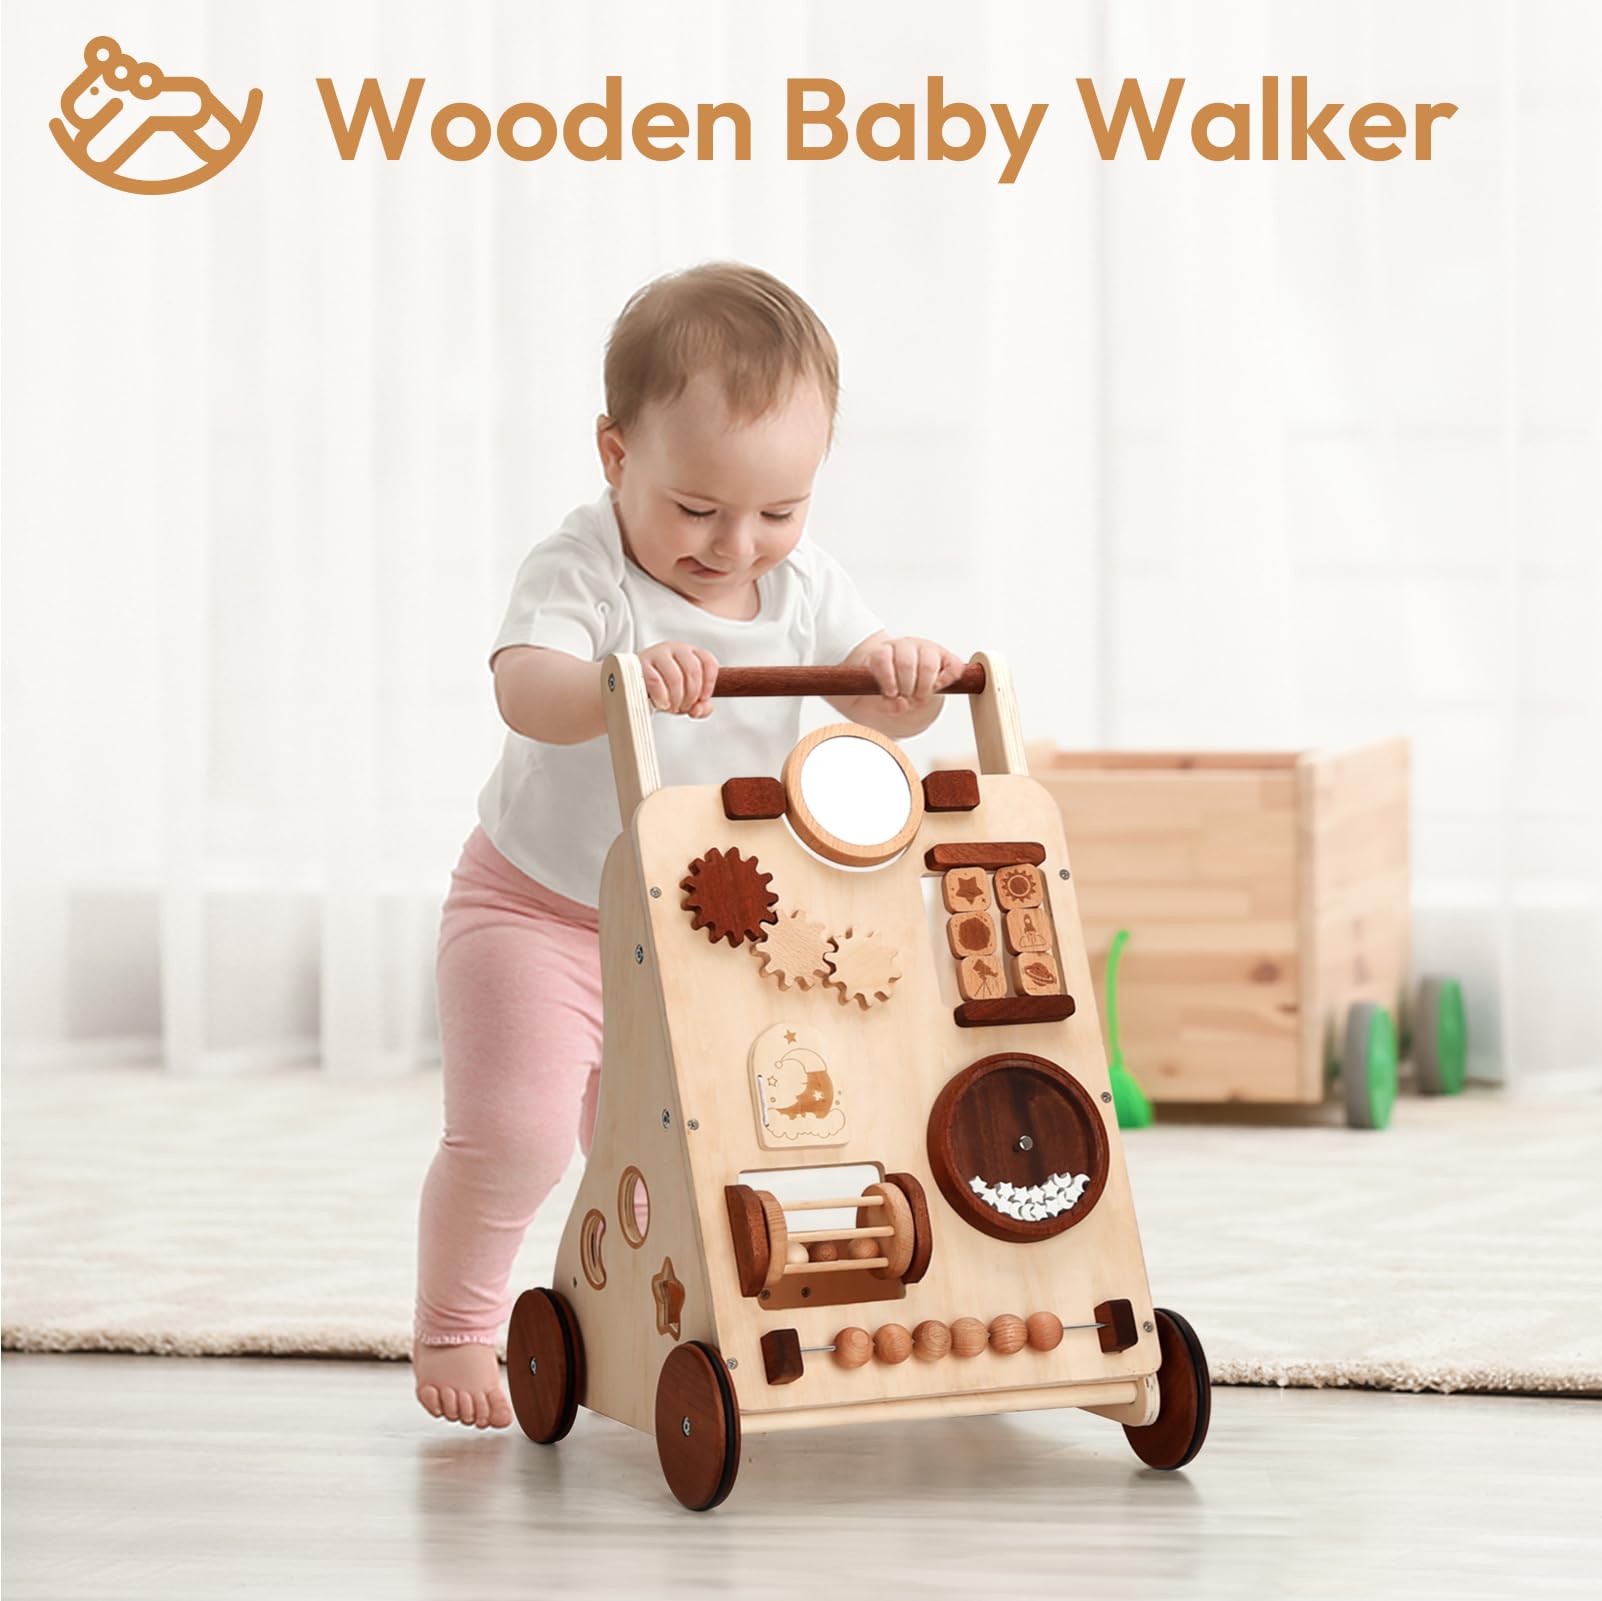 Woodtoe Wooden Baby Walker, Adjustable Push and Pull Learning Activity Center Walker Toy, Natural Wood Sit to Stand Walker for Baby Learning to Walk, Educational Birthday Gift for Toddler Boy Girl 1+